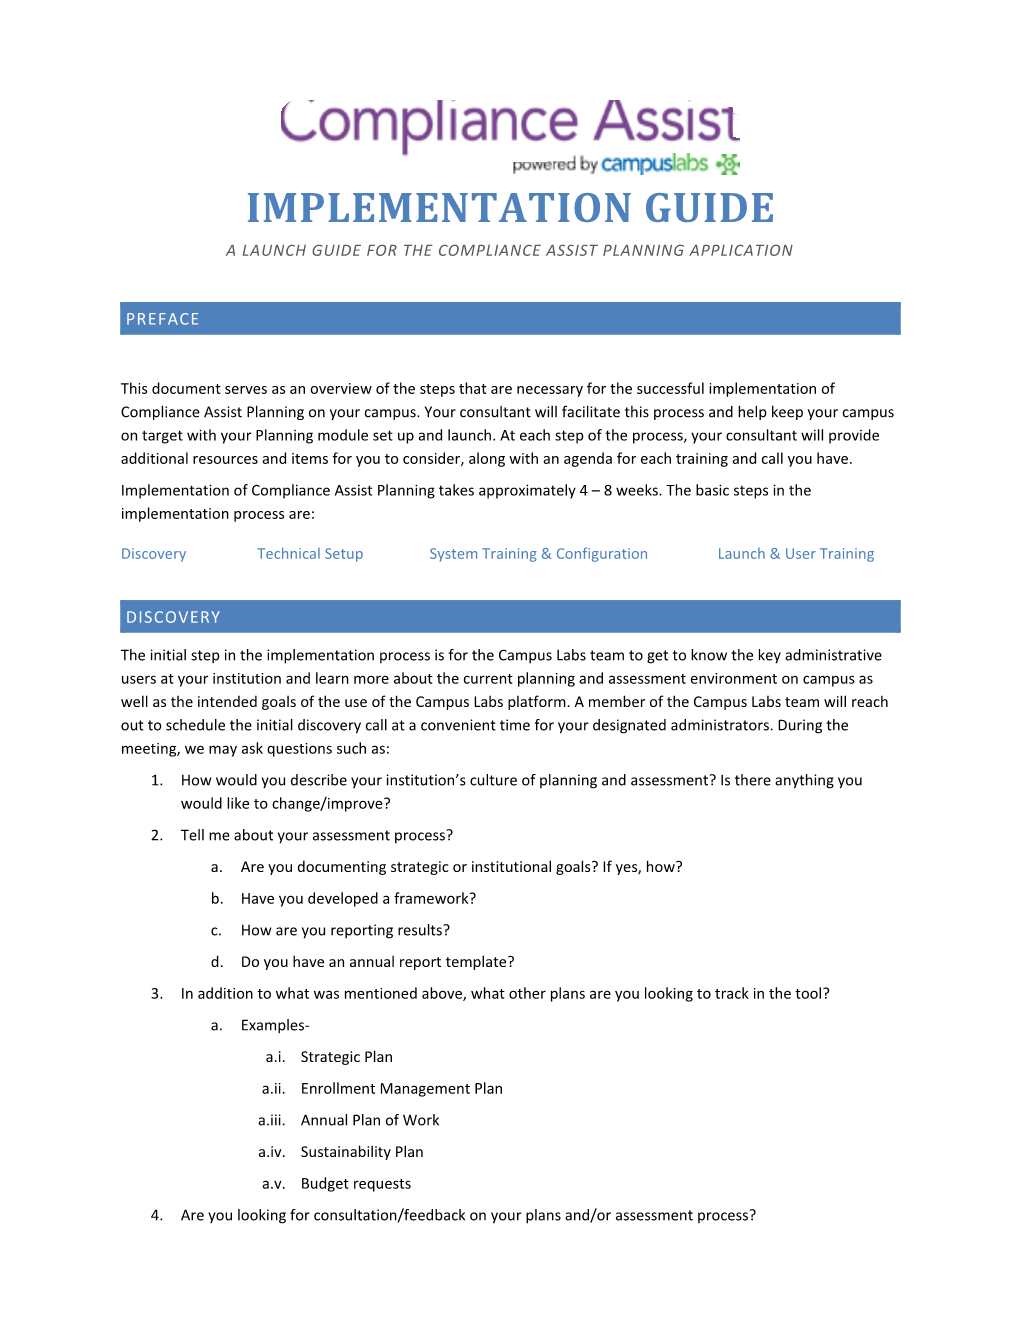 A Launch Guide for the Compliance Assist Planning Application